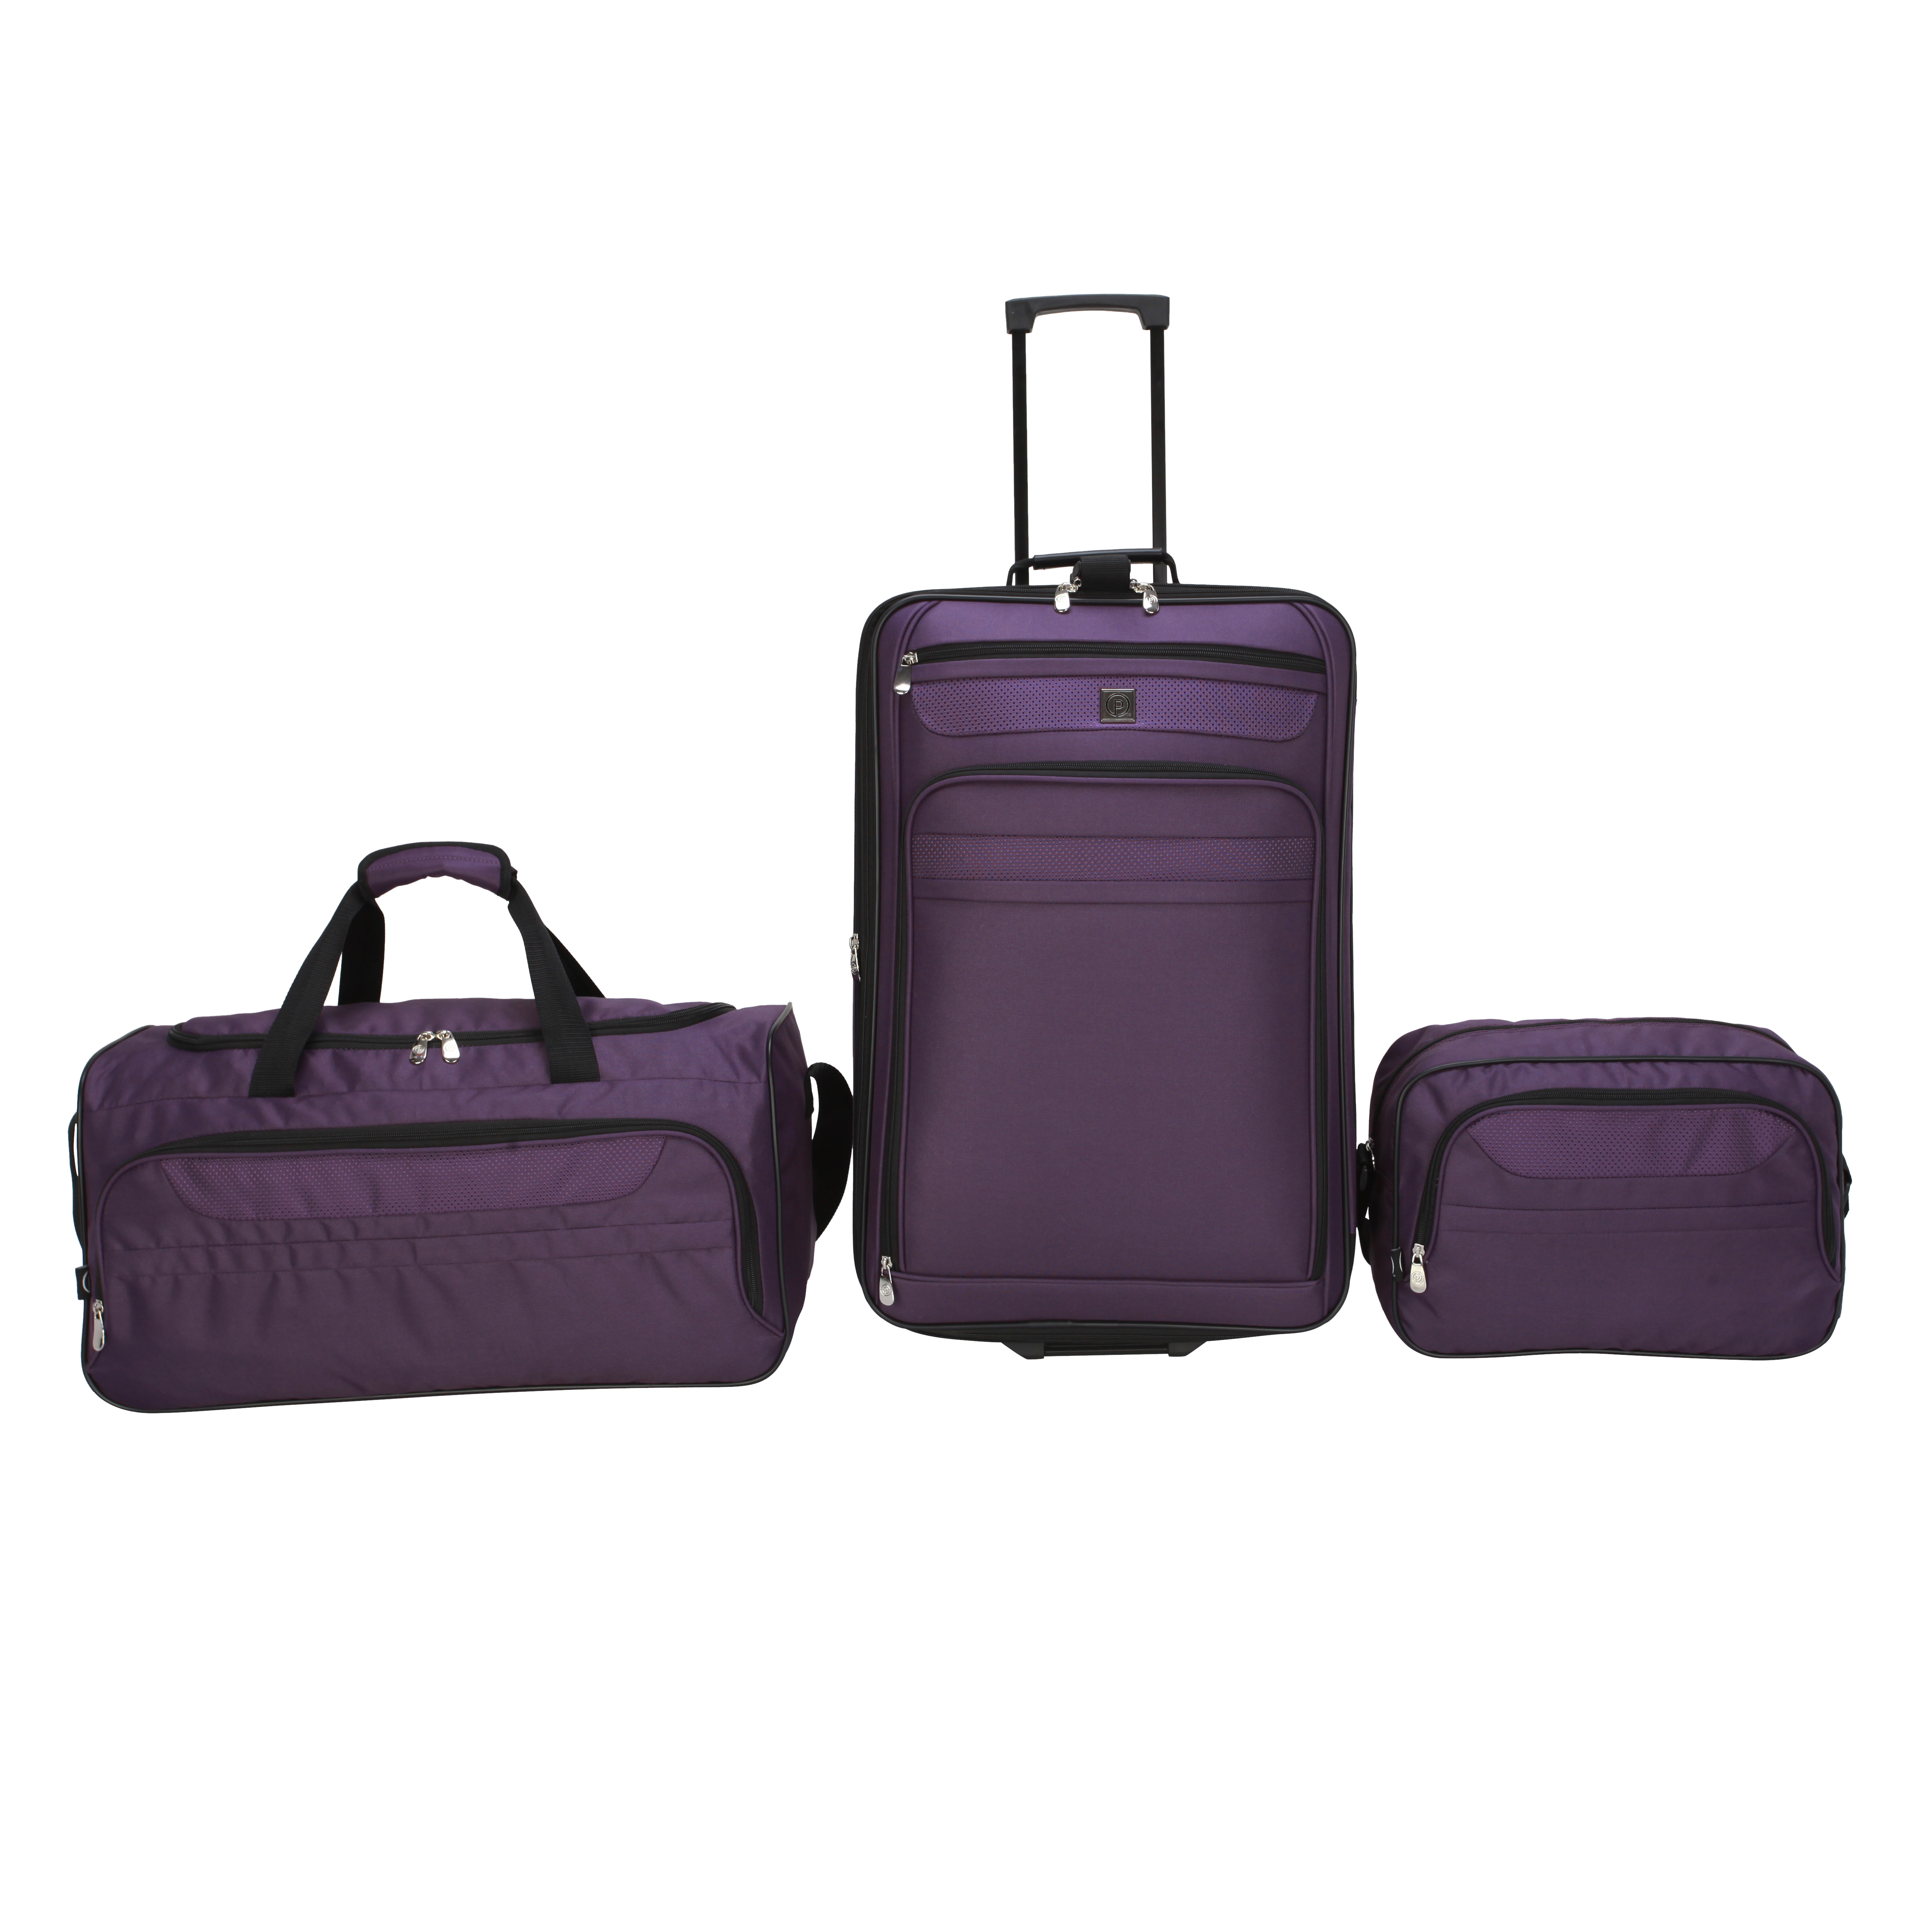 Protege 3 Piece Soft Side Luggage Travel Set including Suitcase, Duffel Bag, and Tote - Purple (Walmart Exclusive) - image 1 of 17